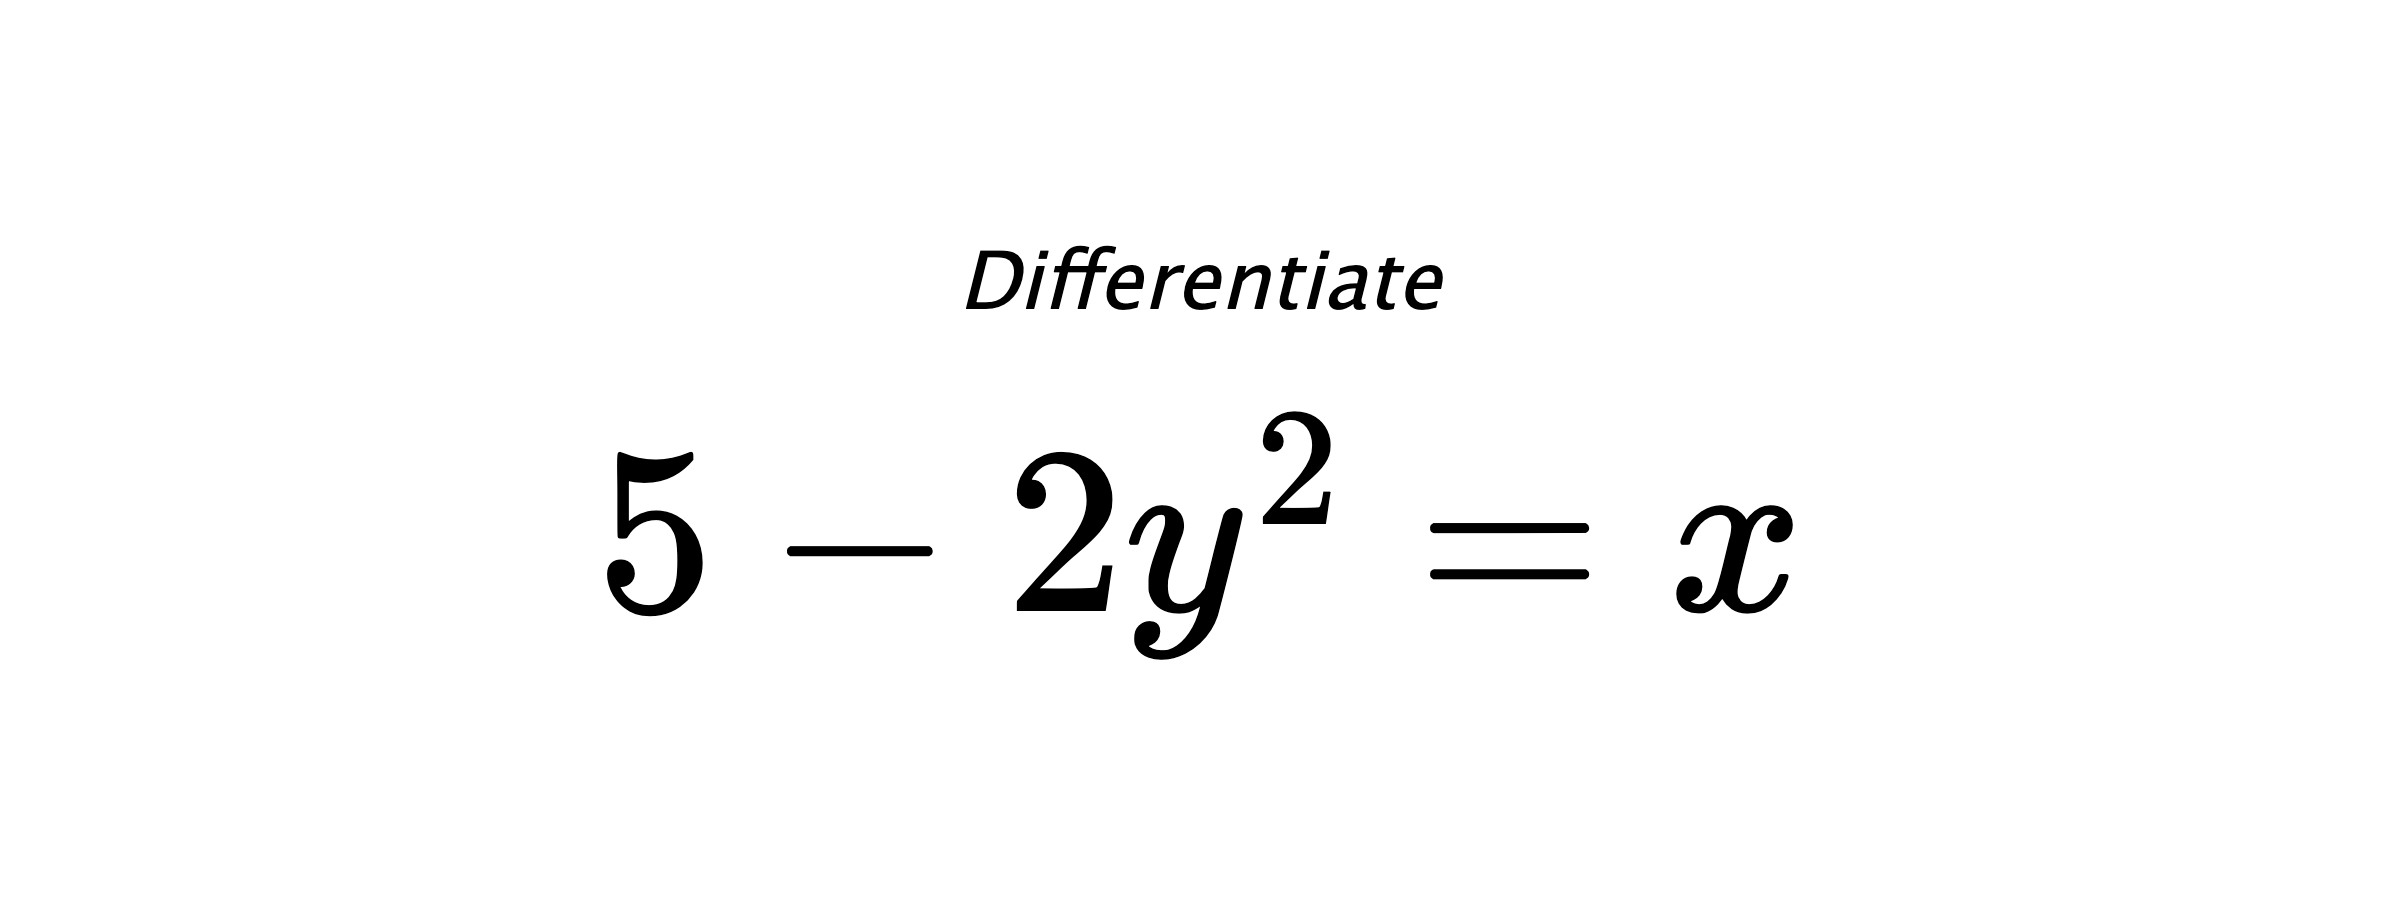 Differentiate $ 5 - 2 y^{2} = x $